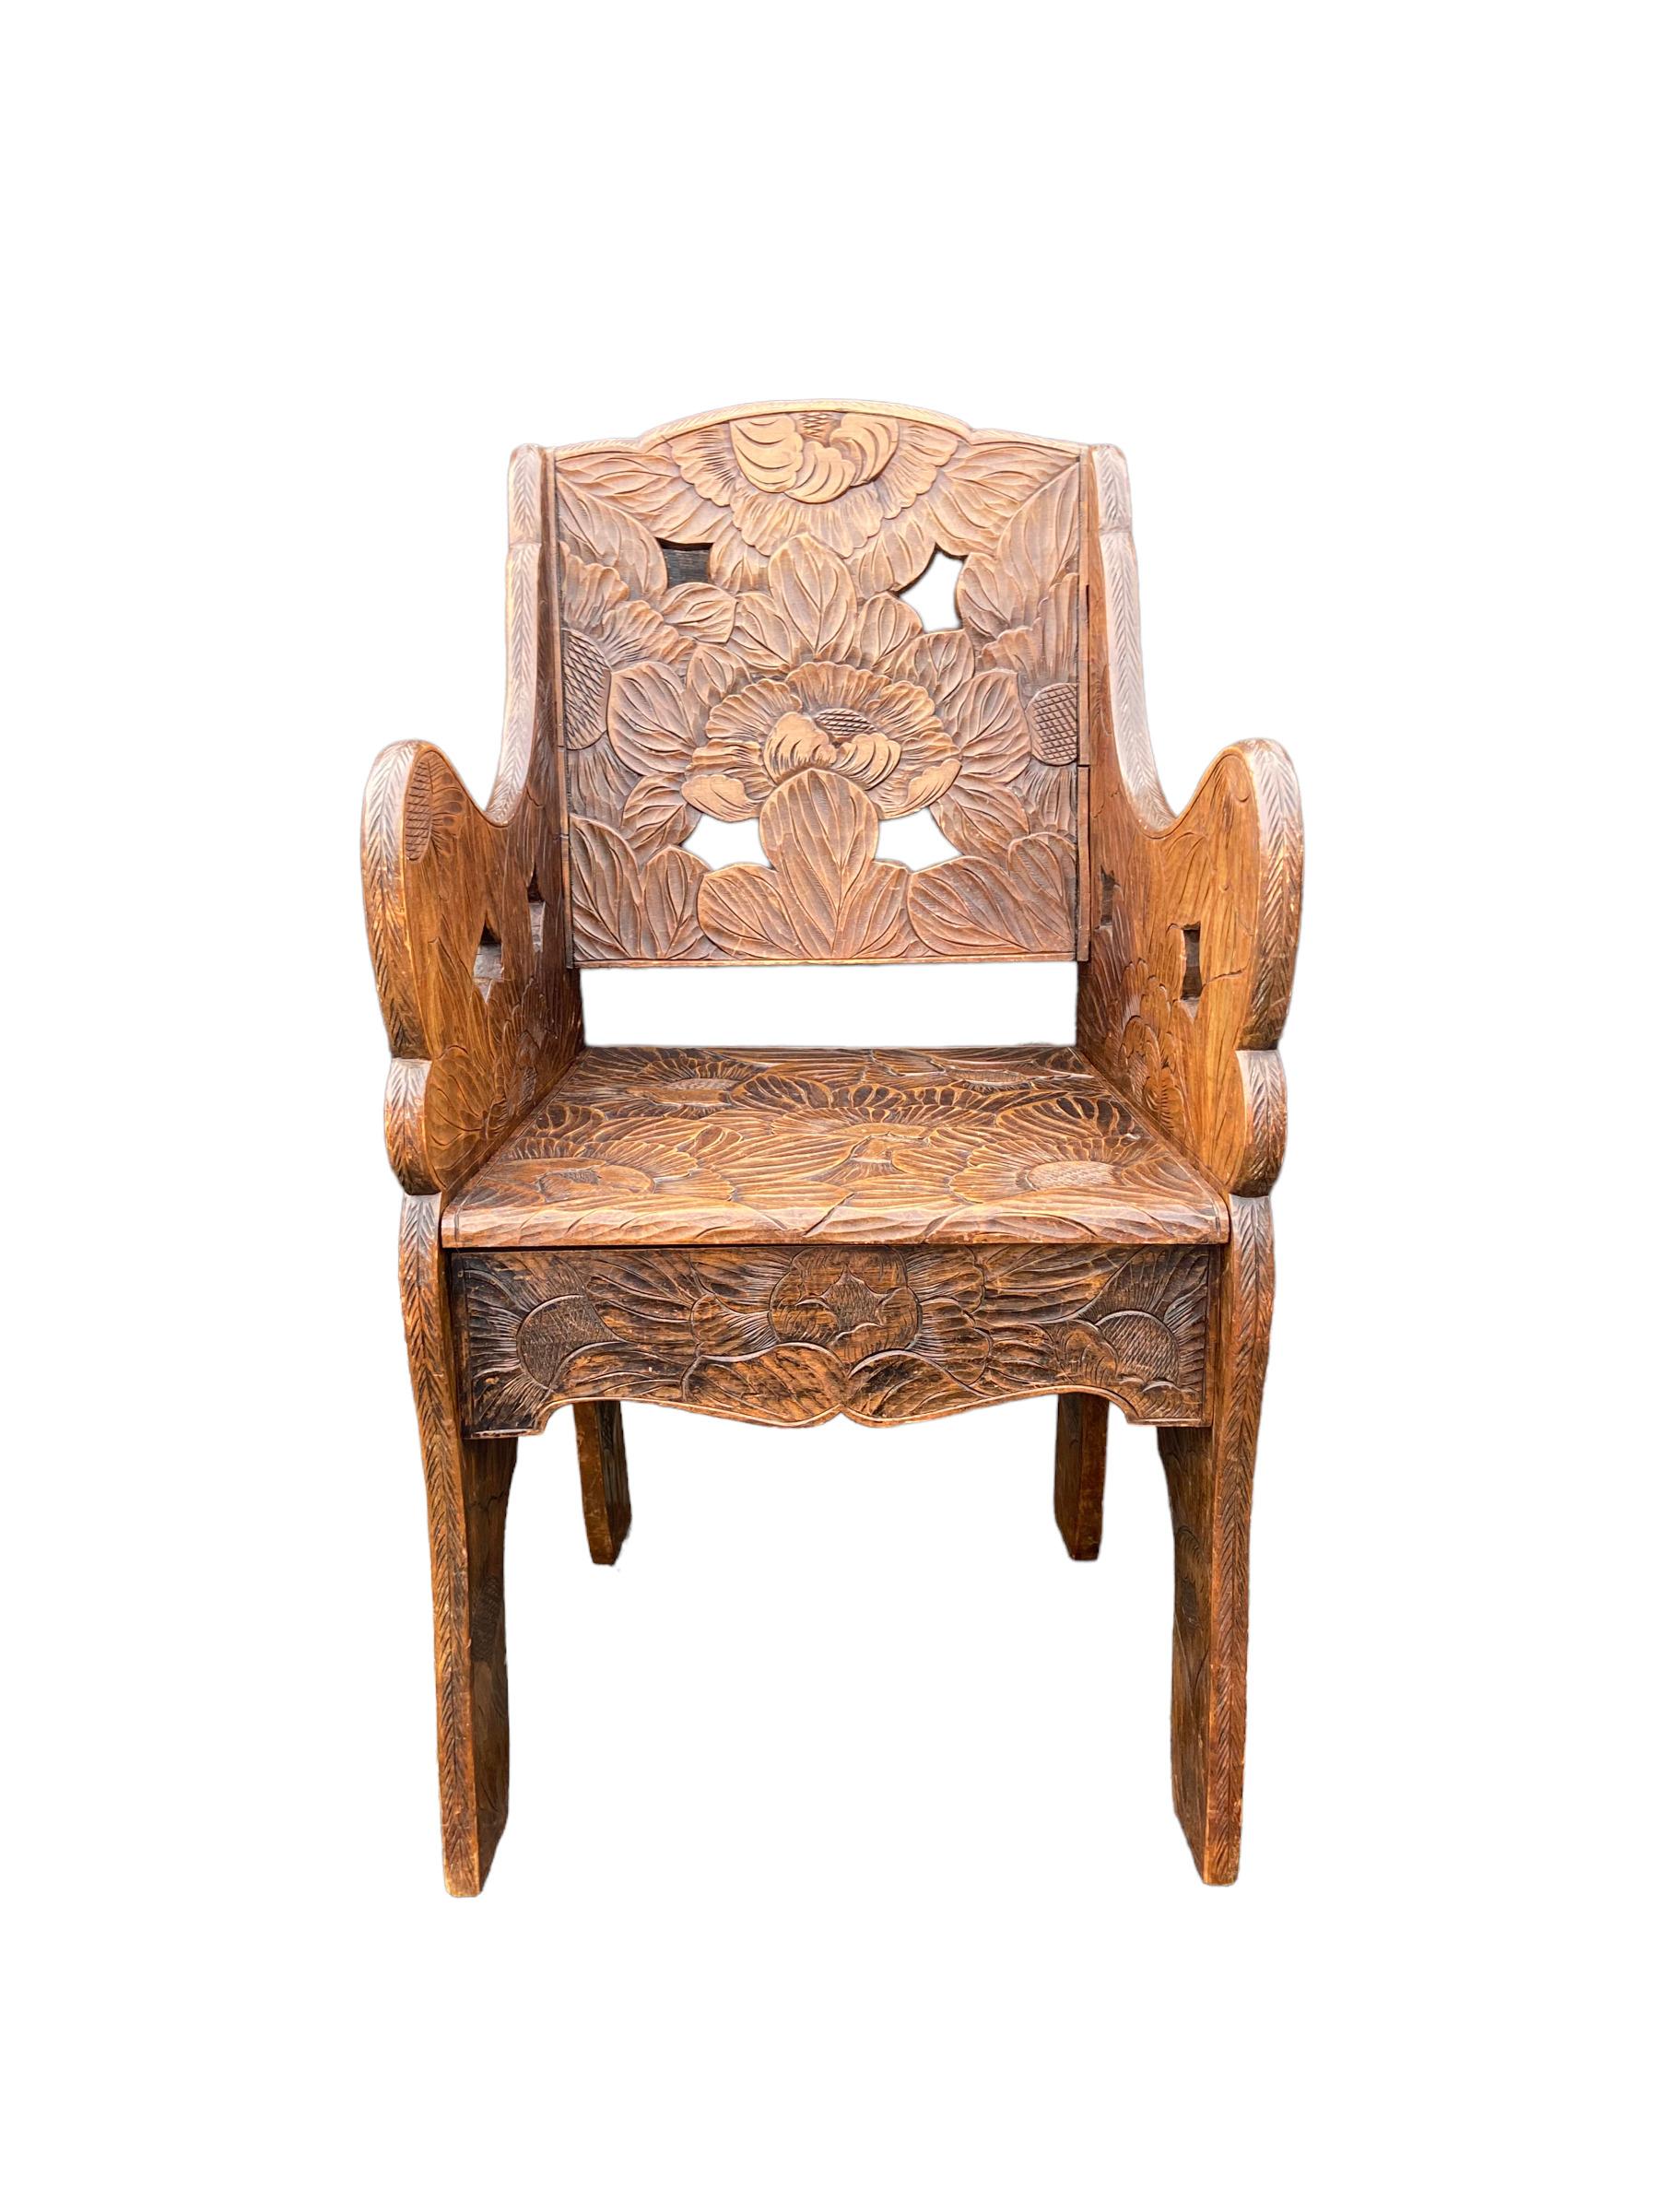 Hand-carved side chair made in Japan around 1910 for Liberty&Co (United Kingdom) made of light wood. (feels like beechwood) This Arts & Crafts object is in a very good condition but it shows sign of age.

Measures: seat height 45,5 cm, height 93,5